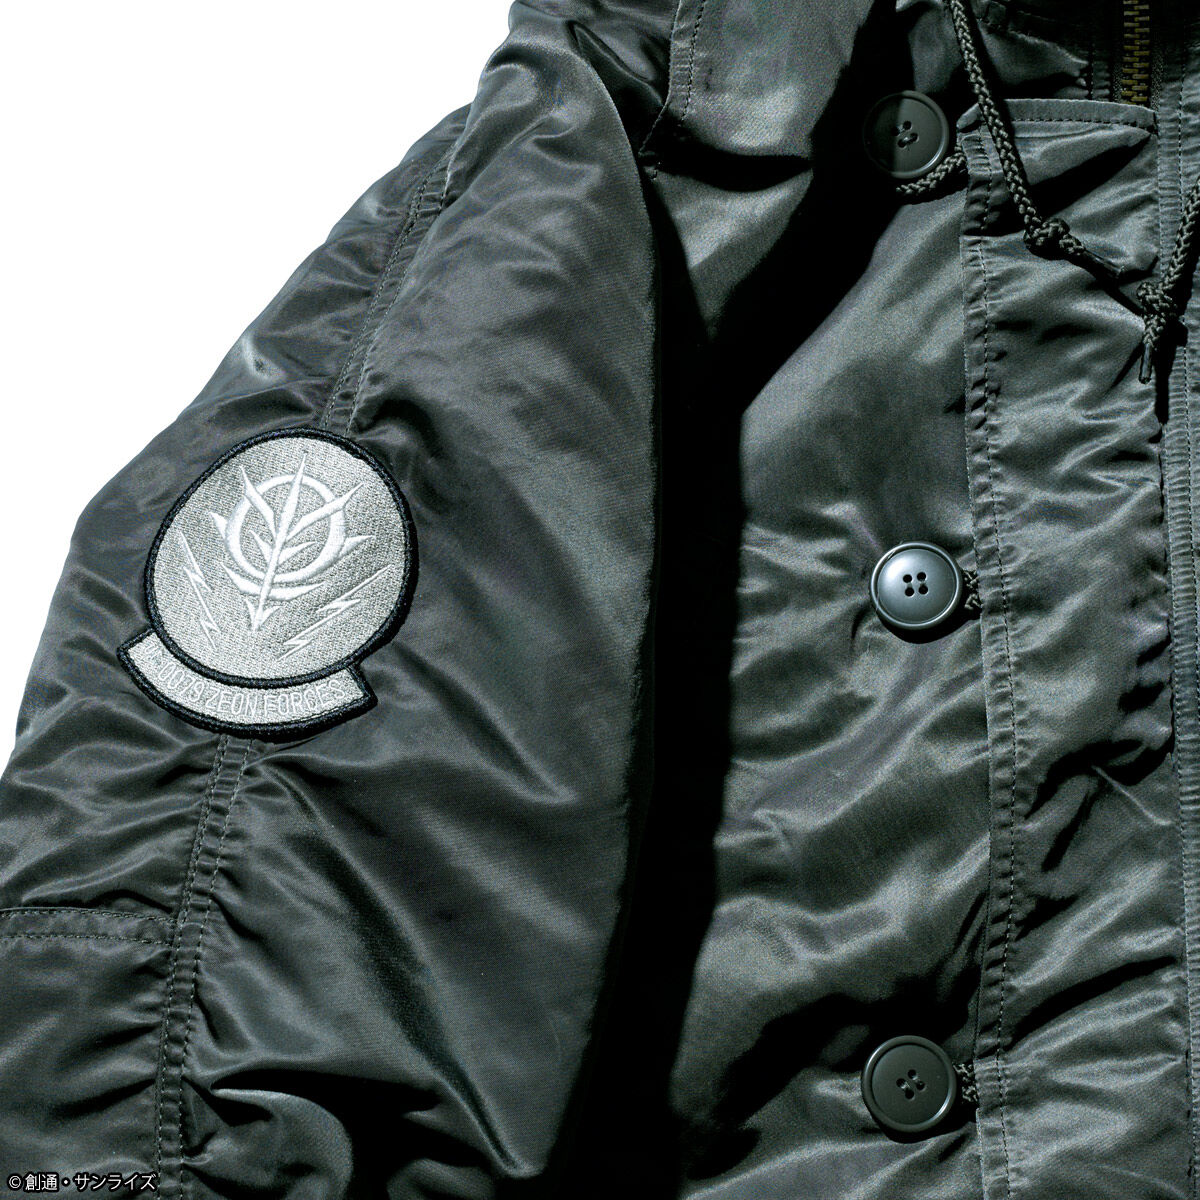 STRICT-G x ALPHA Mobile Suit Gundam Principality of Zeon N-3B Jacket  [July 2022 Delivery]